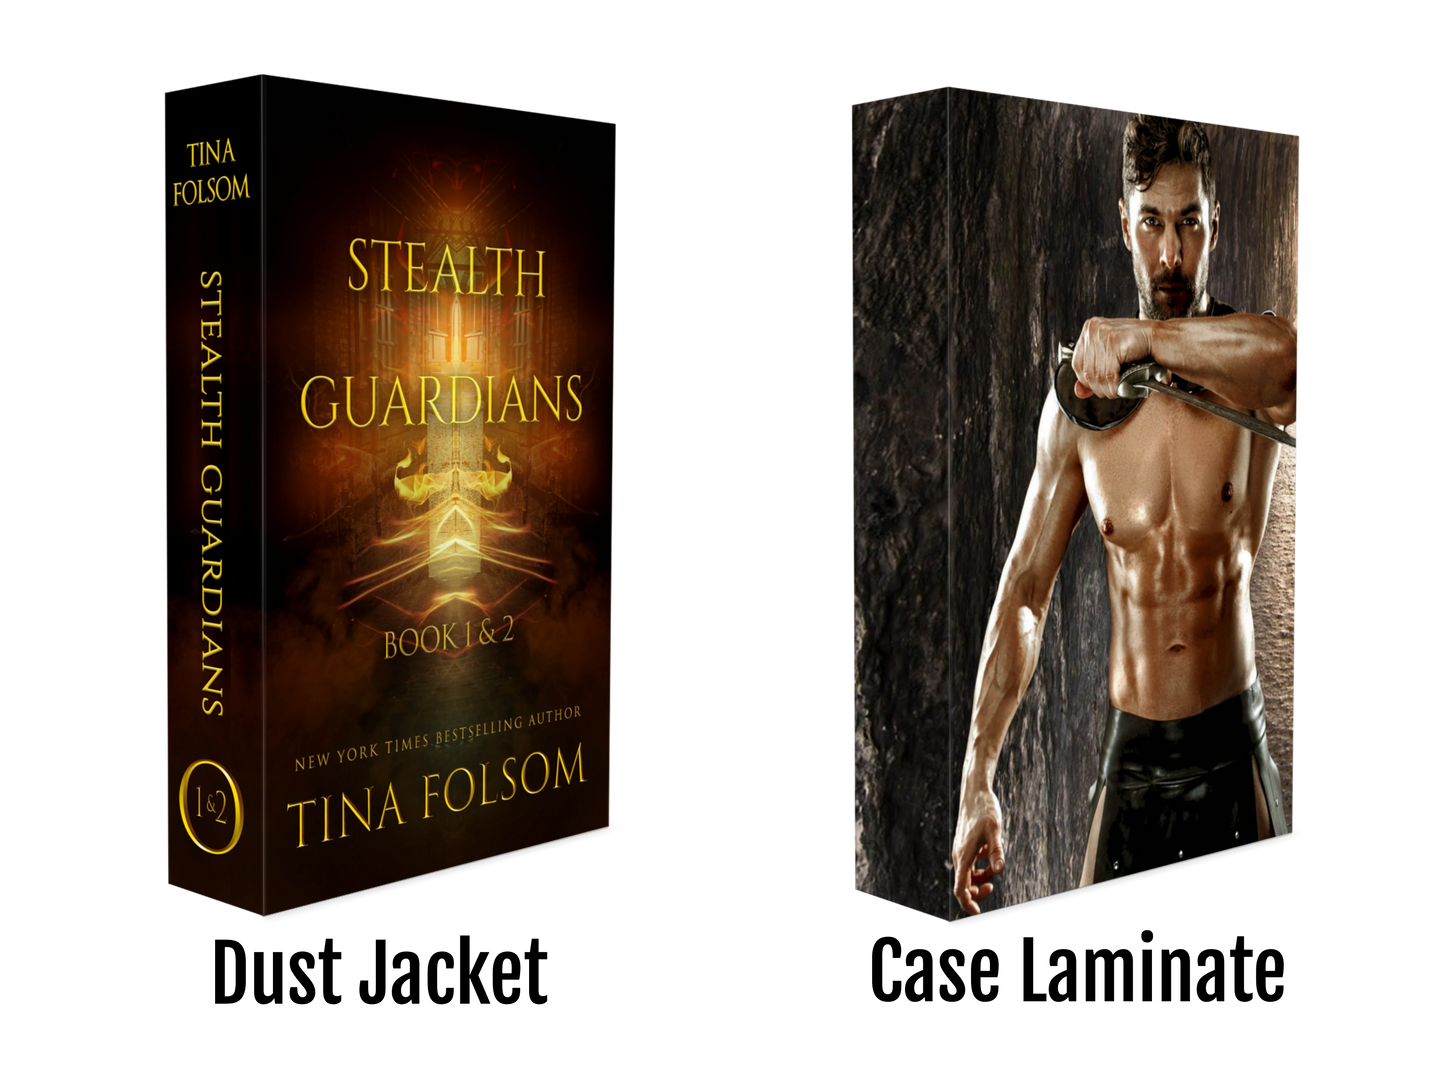 Stealth Guardians (Book  1 & 2)